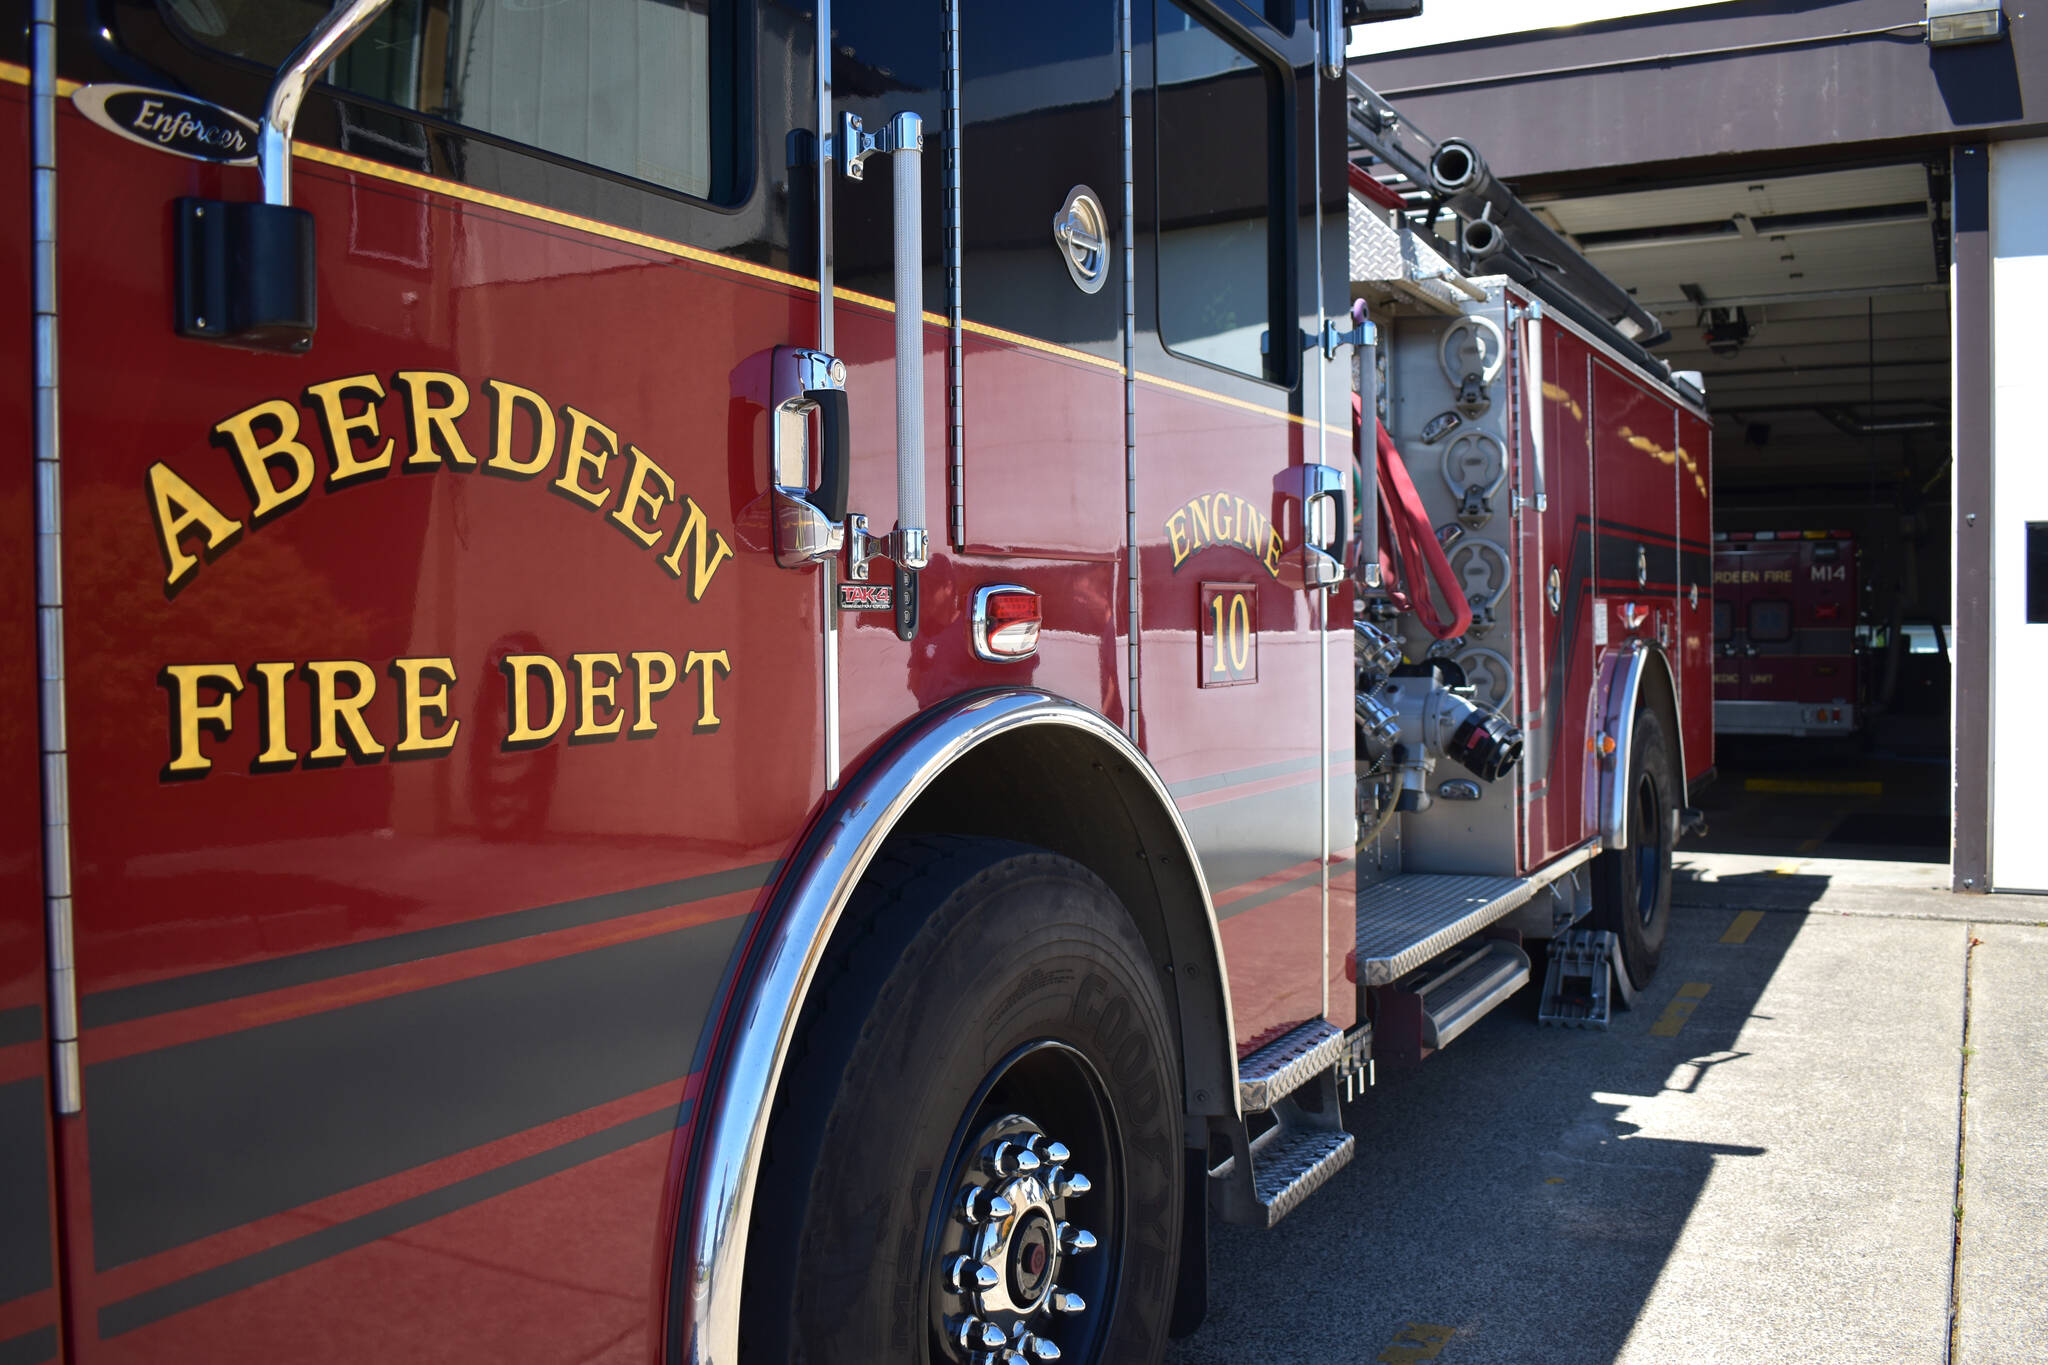 Matthew N. Wells | The Daily World
Aberdeen Fire Department’s engine No. 10 sits on Tuesday, July 19, 2022. Soon, a new chief, John Clark, will take command of the department. He said he has big shoes to fill after Fire Chief Tom Hubbard retired June 10, 2022.